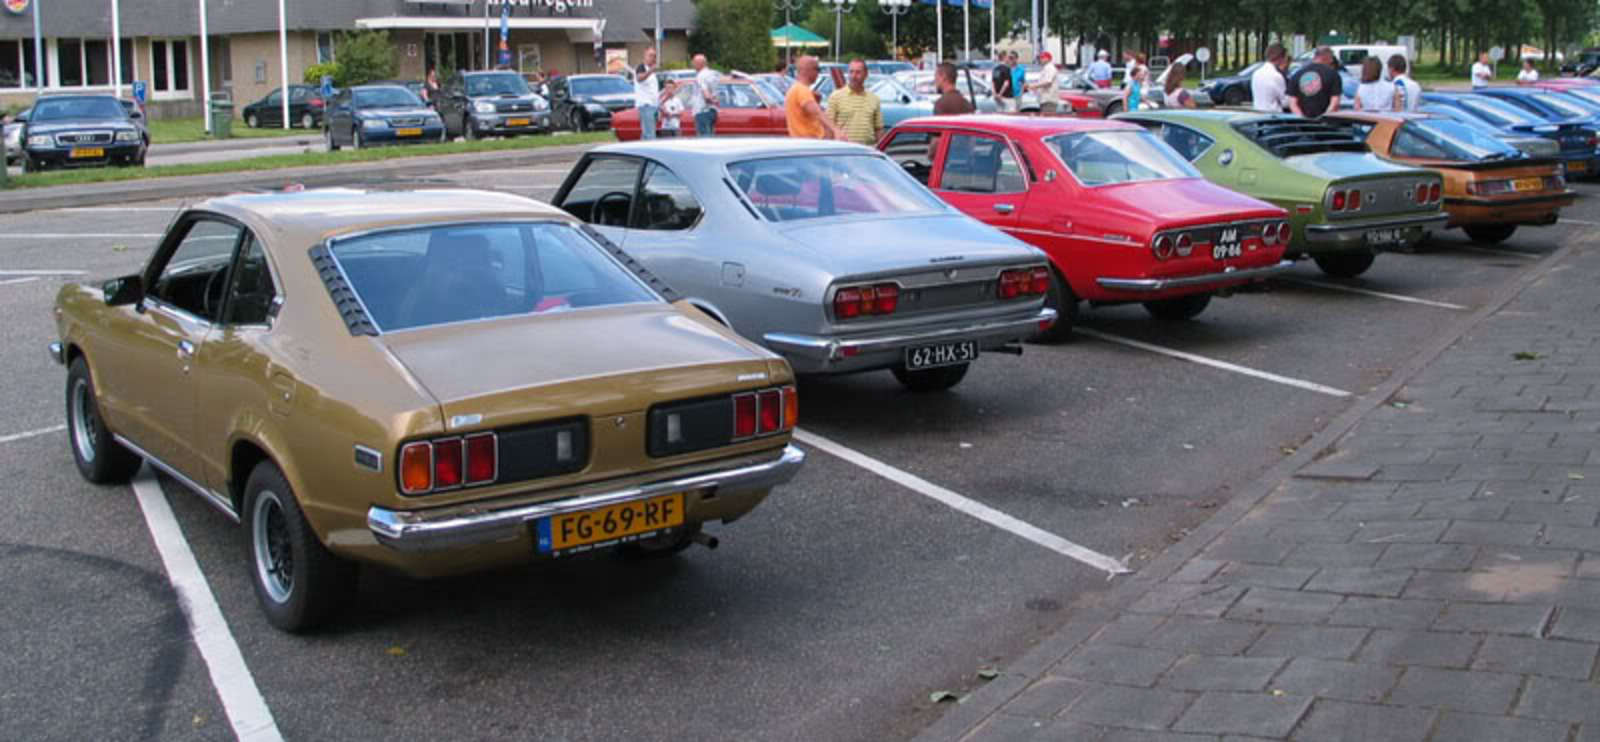 Image The website is still horrible but nice pics of old Mazda's in The